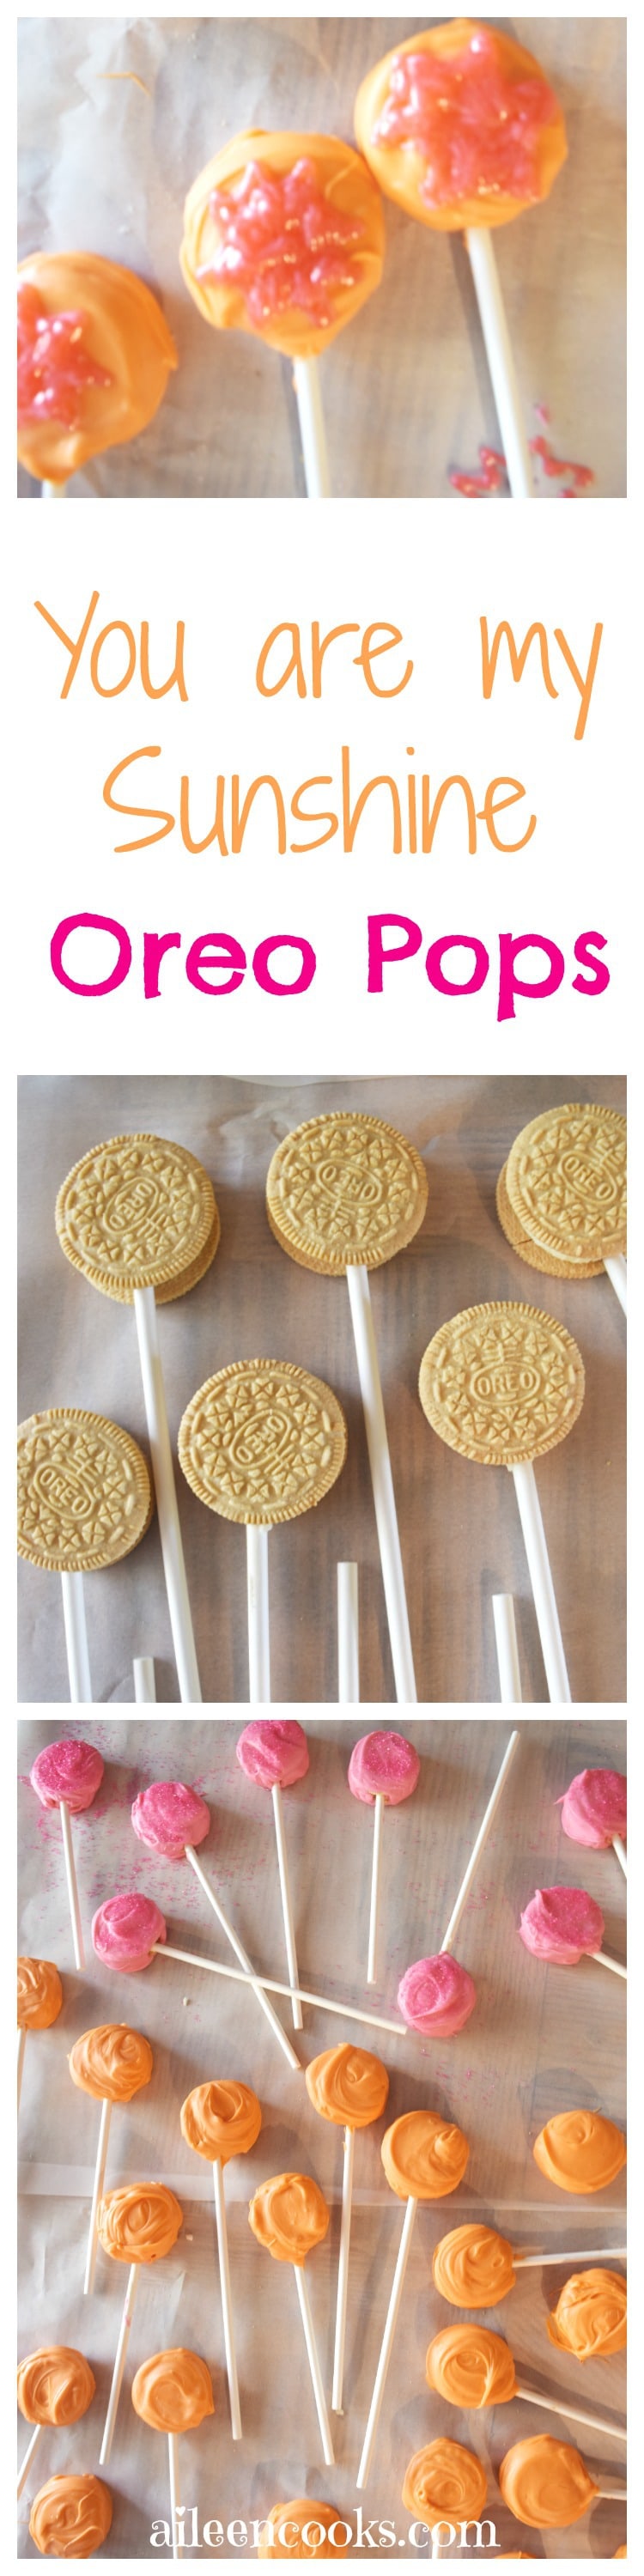 Make these you are my sunshine oreo pops to go with a fun you are my sunshine themed party. Oreo cookie pops are easy to make and even more fun to eat!